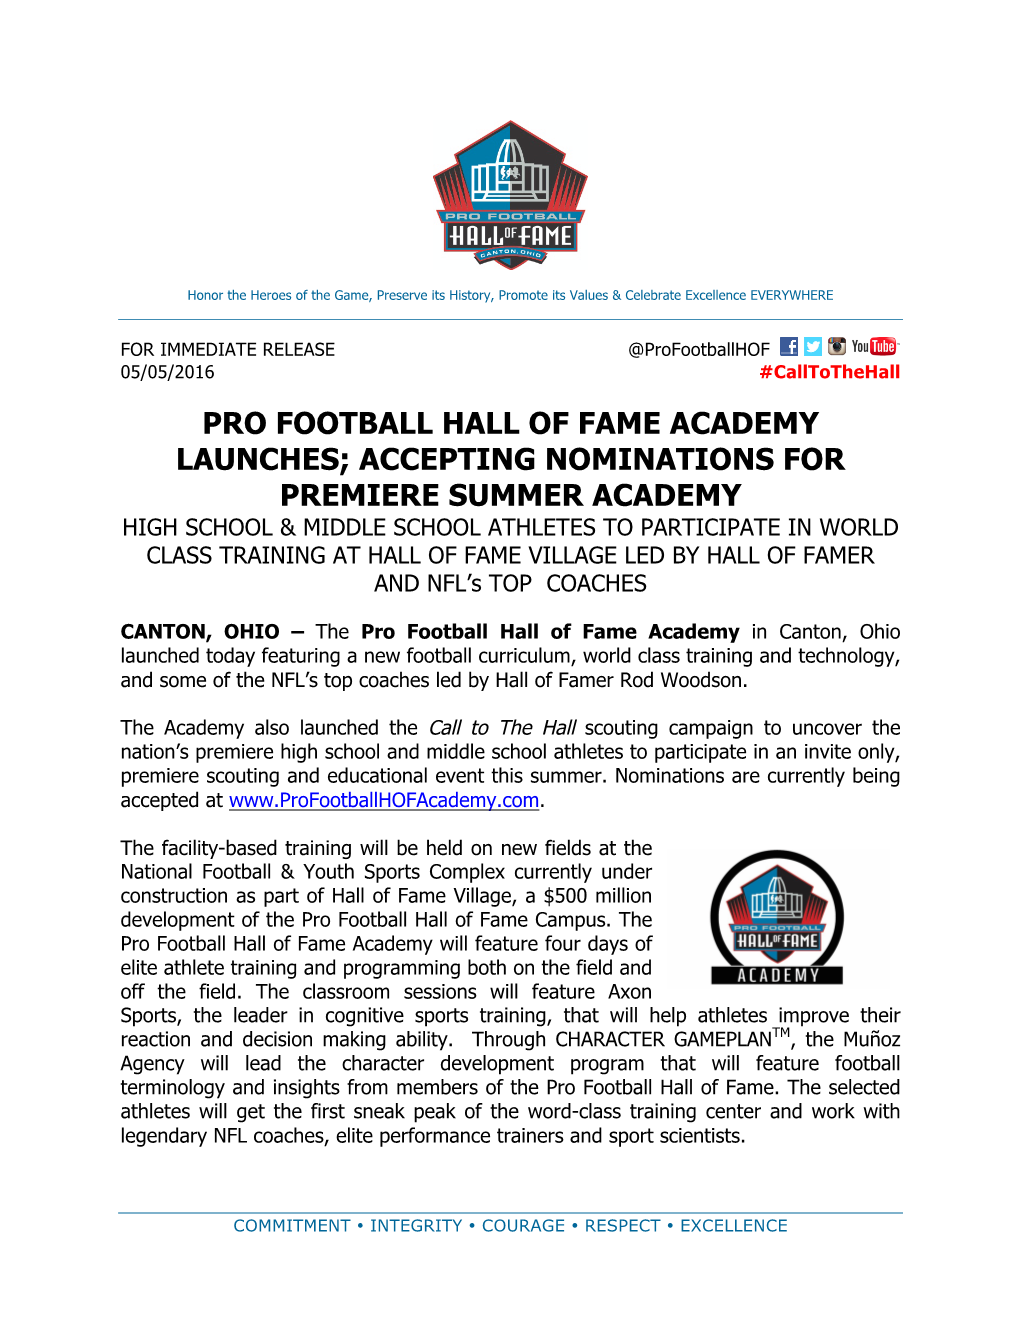 Pro Football Hall of Fame Academy Launches